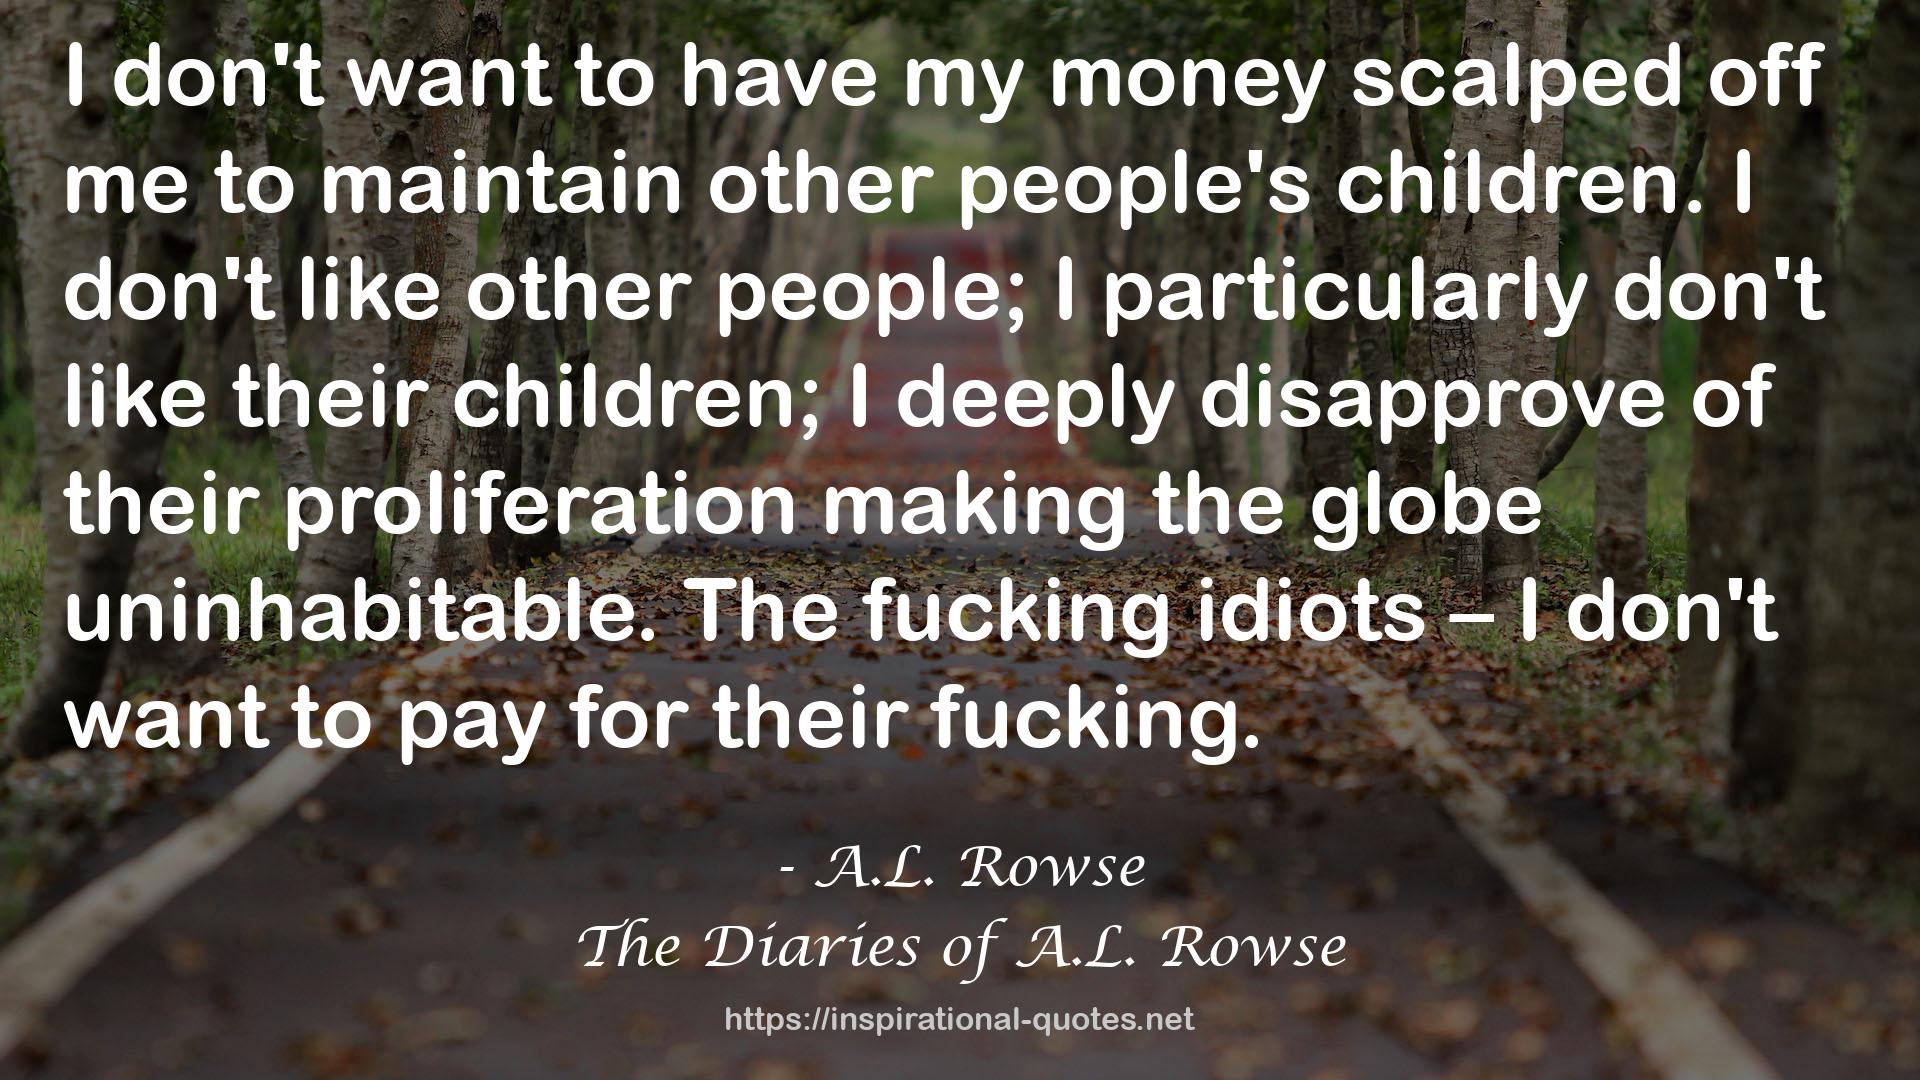 The Diaries of A.L. Rowse QUOTES